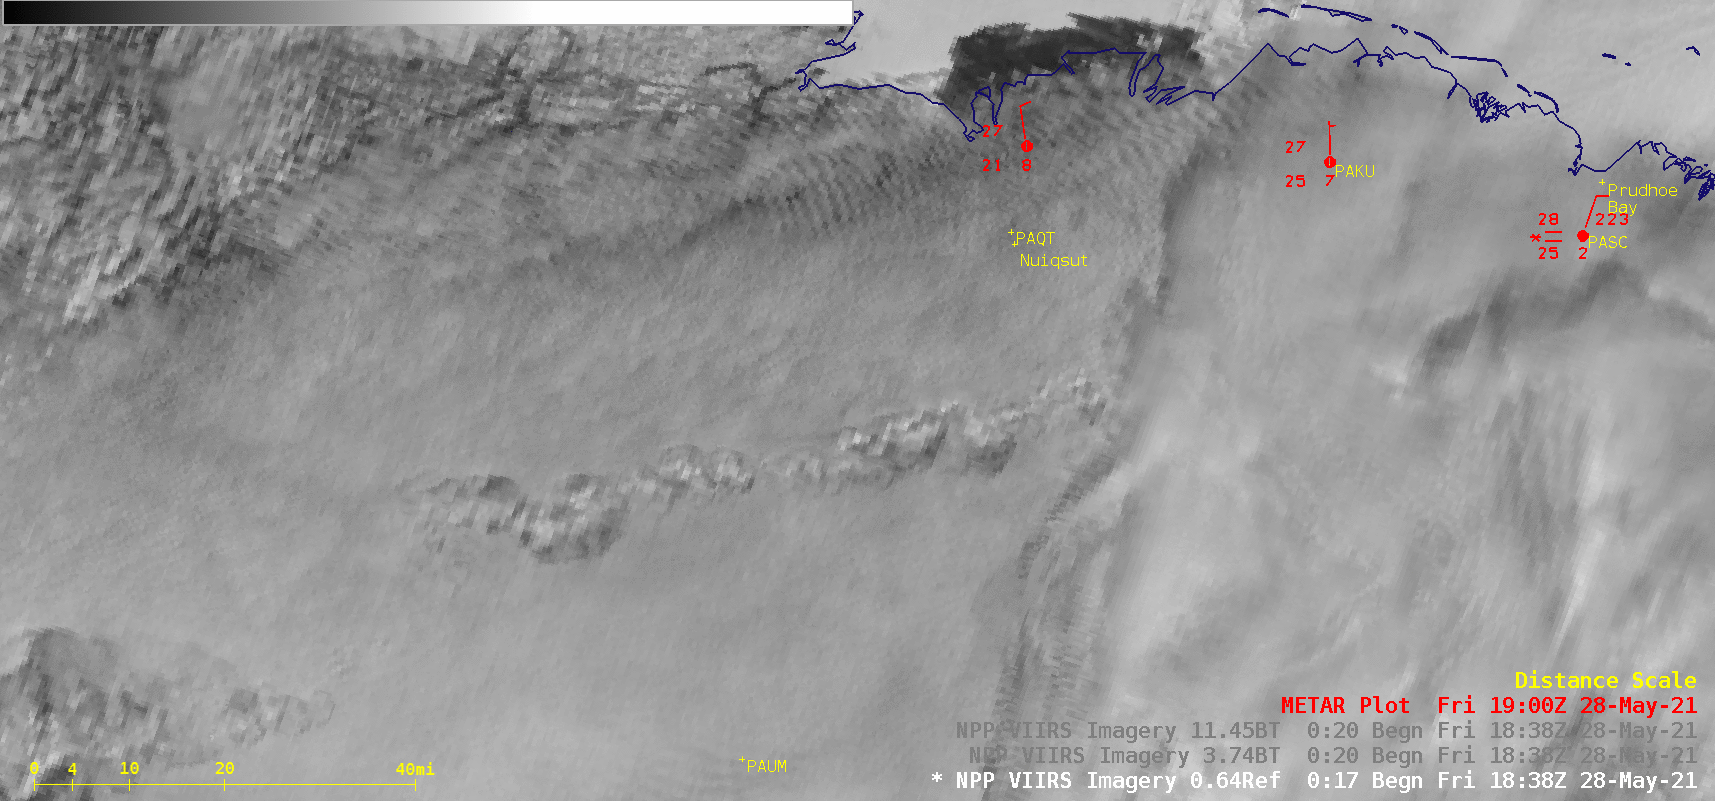 Suomi NPP VIIRS Visible (0.64 µm), Shortwave Infrared (3.74 µm) and Infrared Window (11.45 µm) images [click to enlarge]